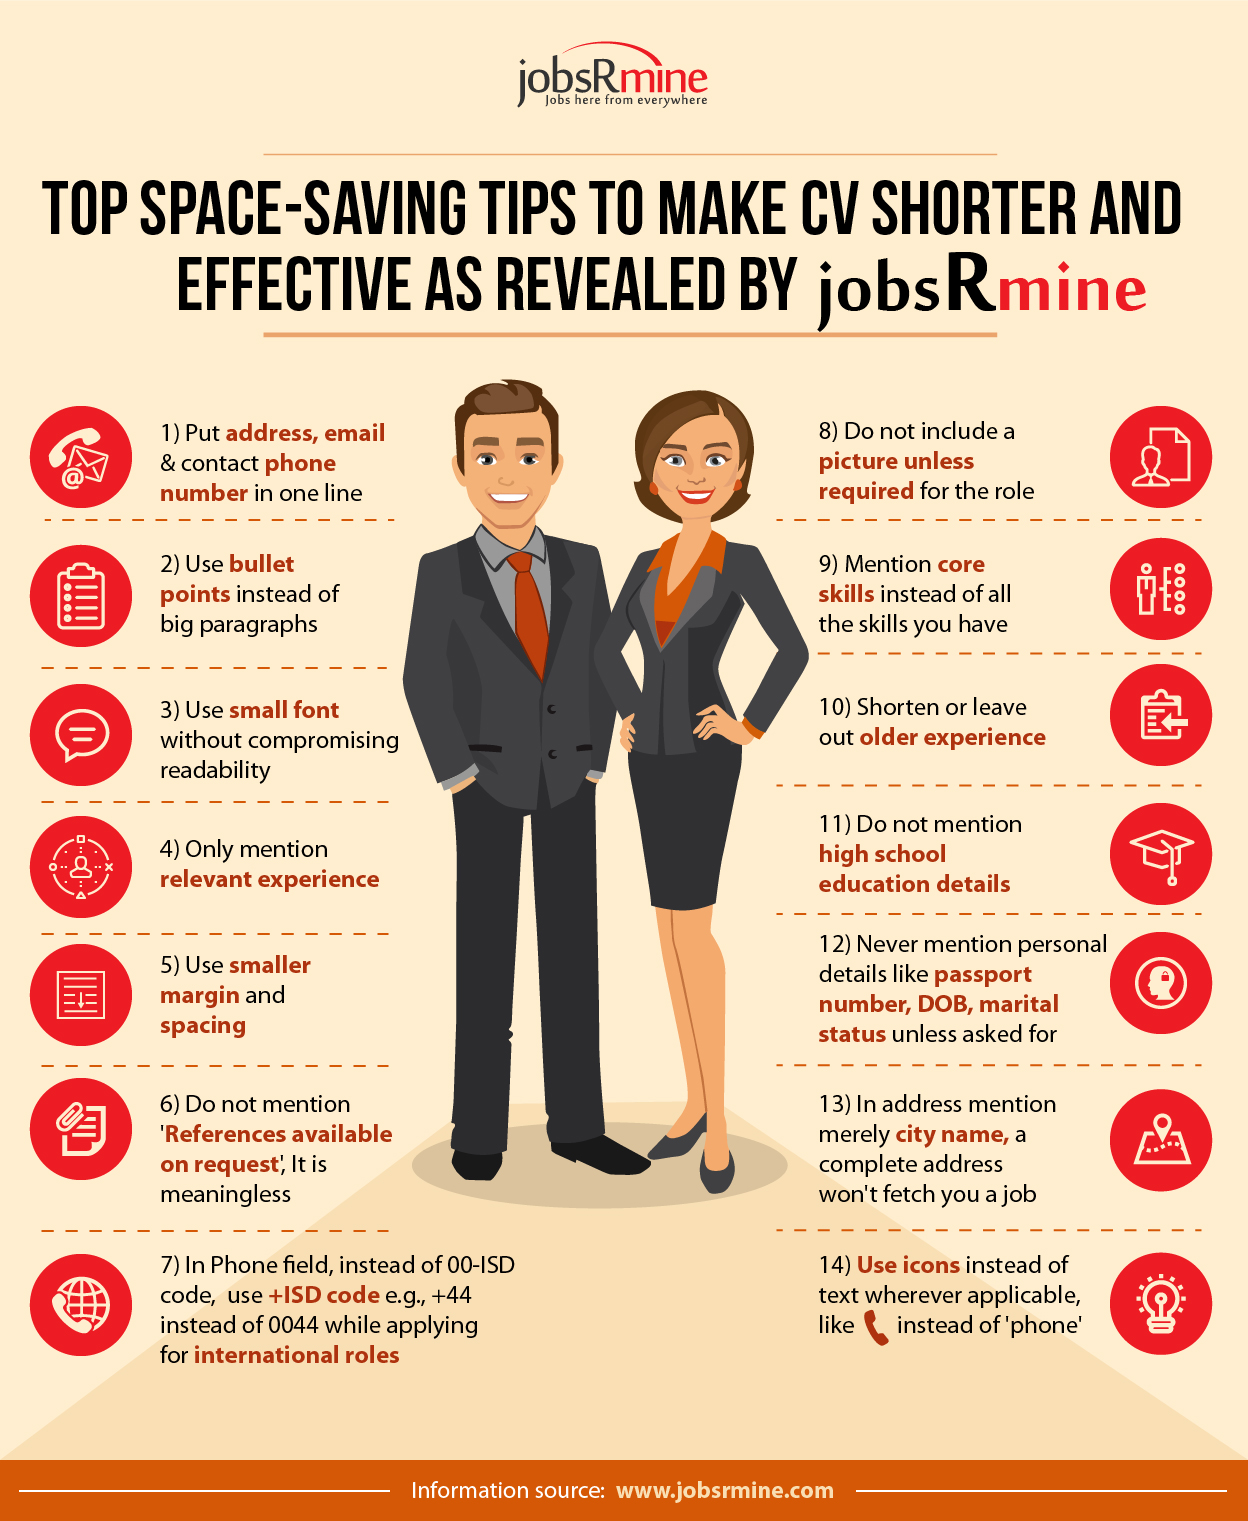 Download Tips to make CV shorter for free, by clicking download button